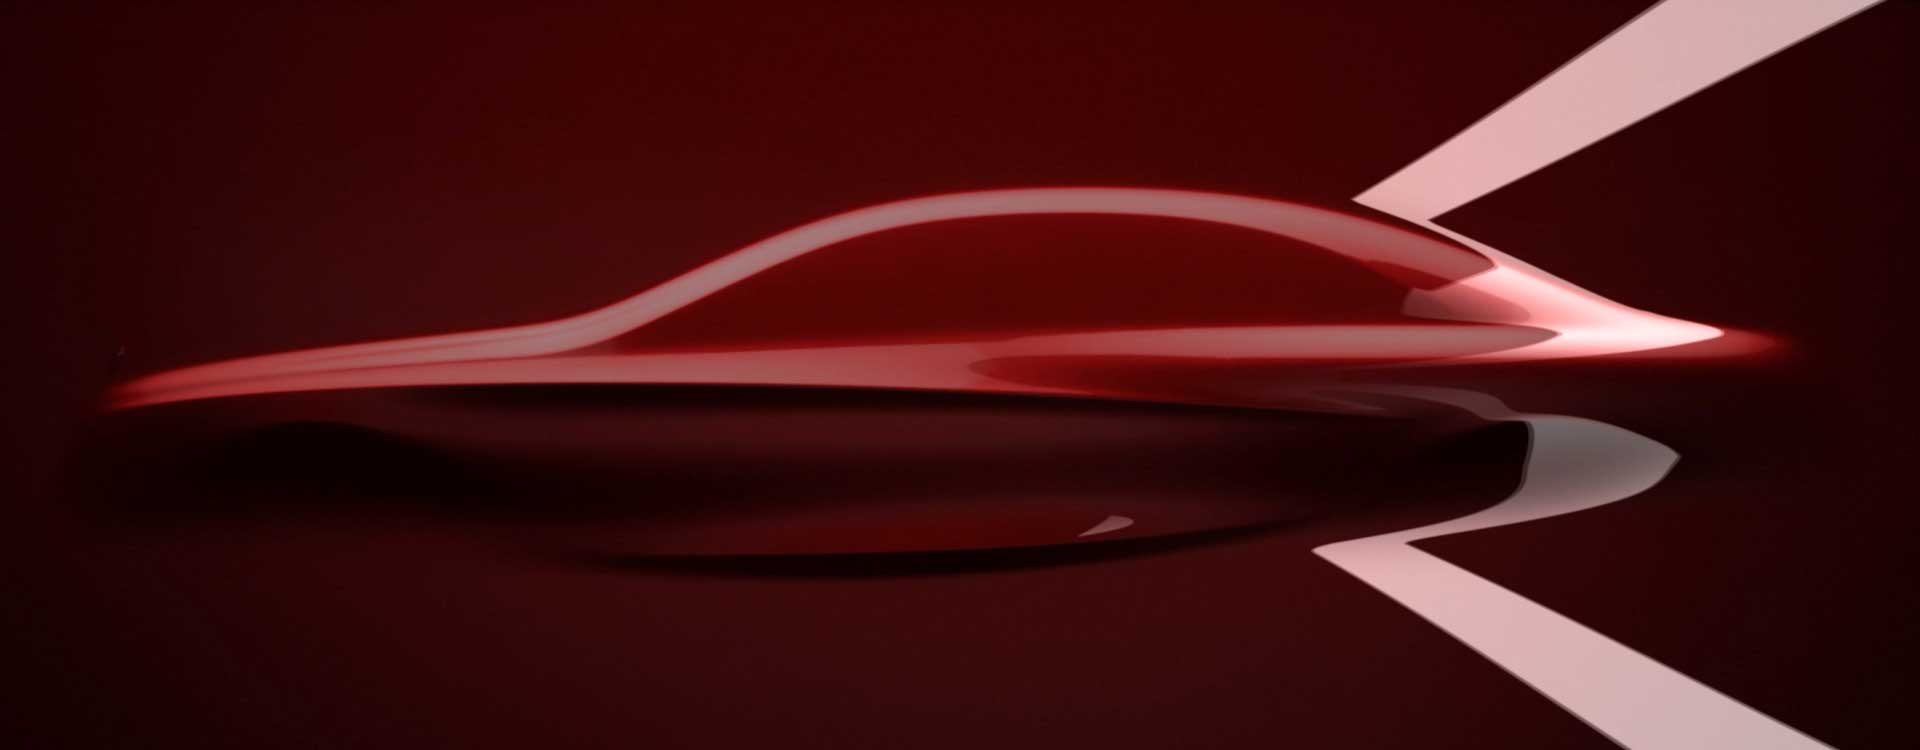 Silhouette in red. Still from Mercedes-Benz Commercial.